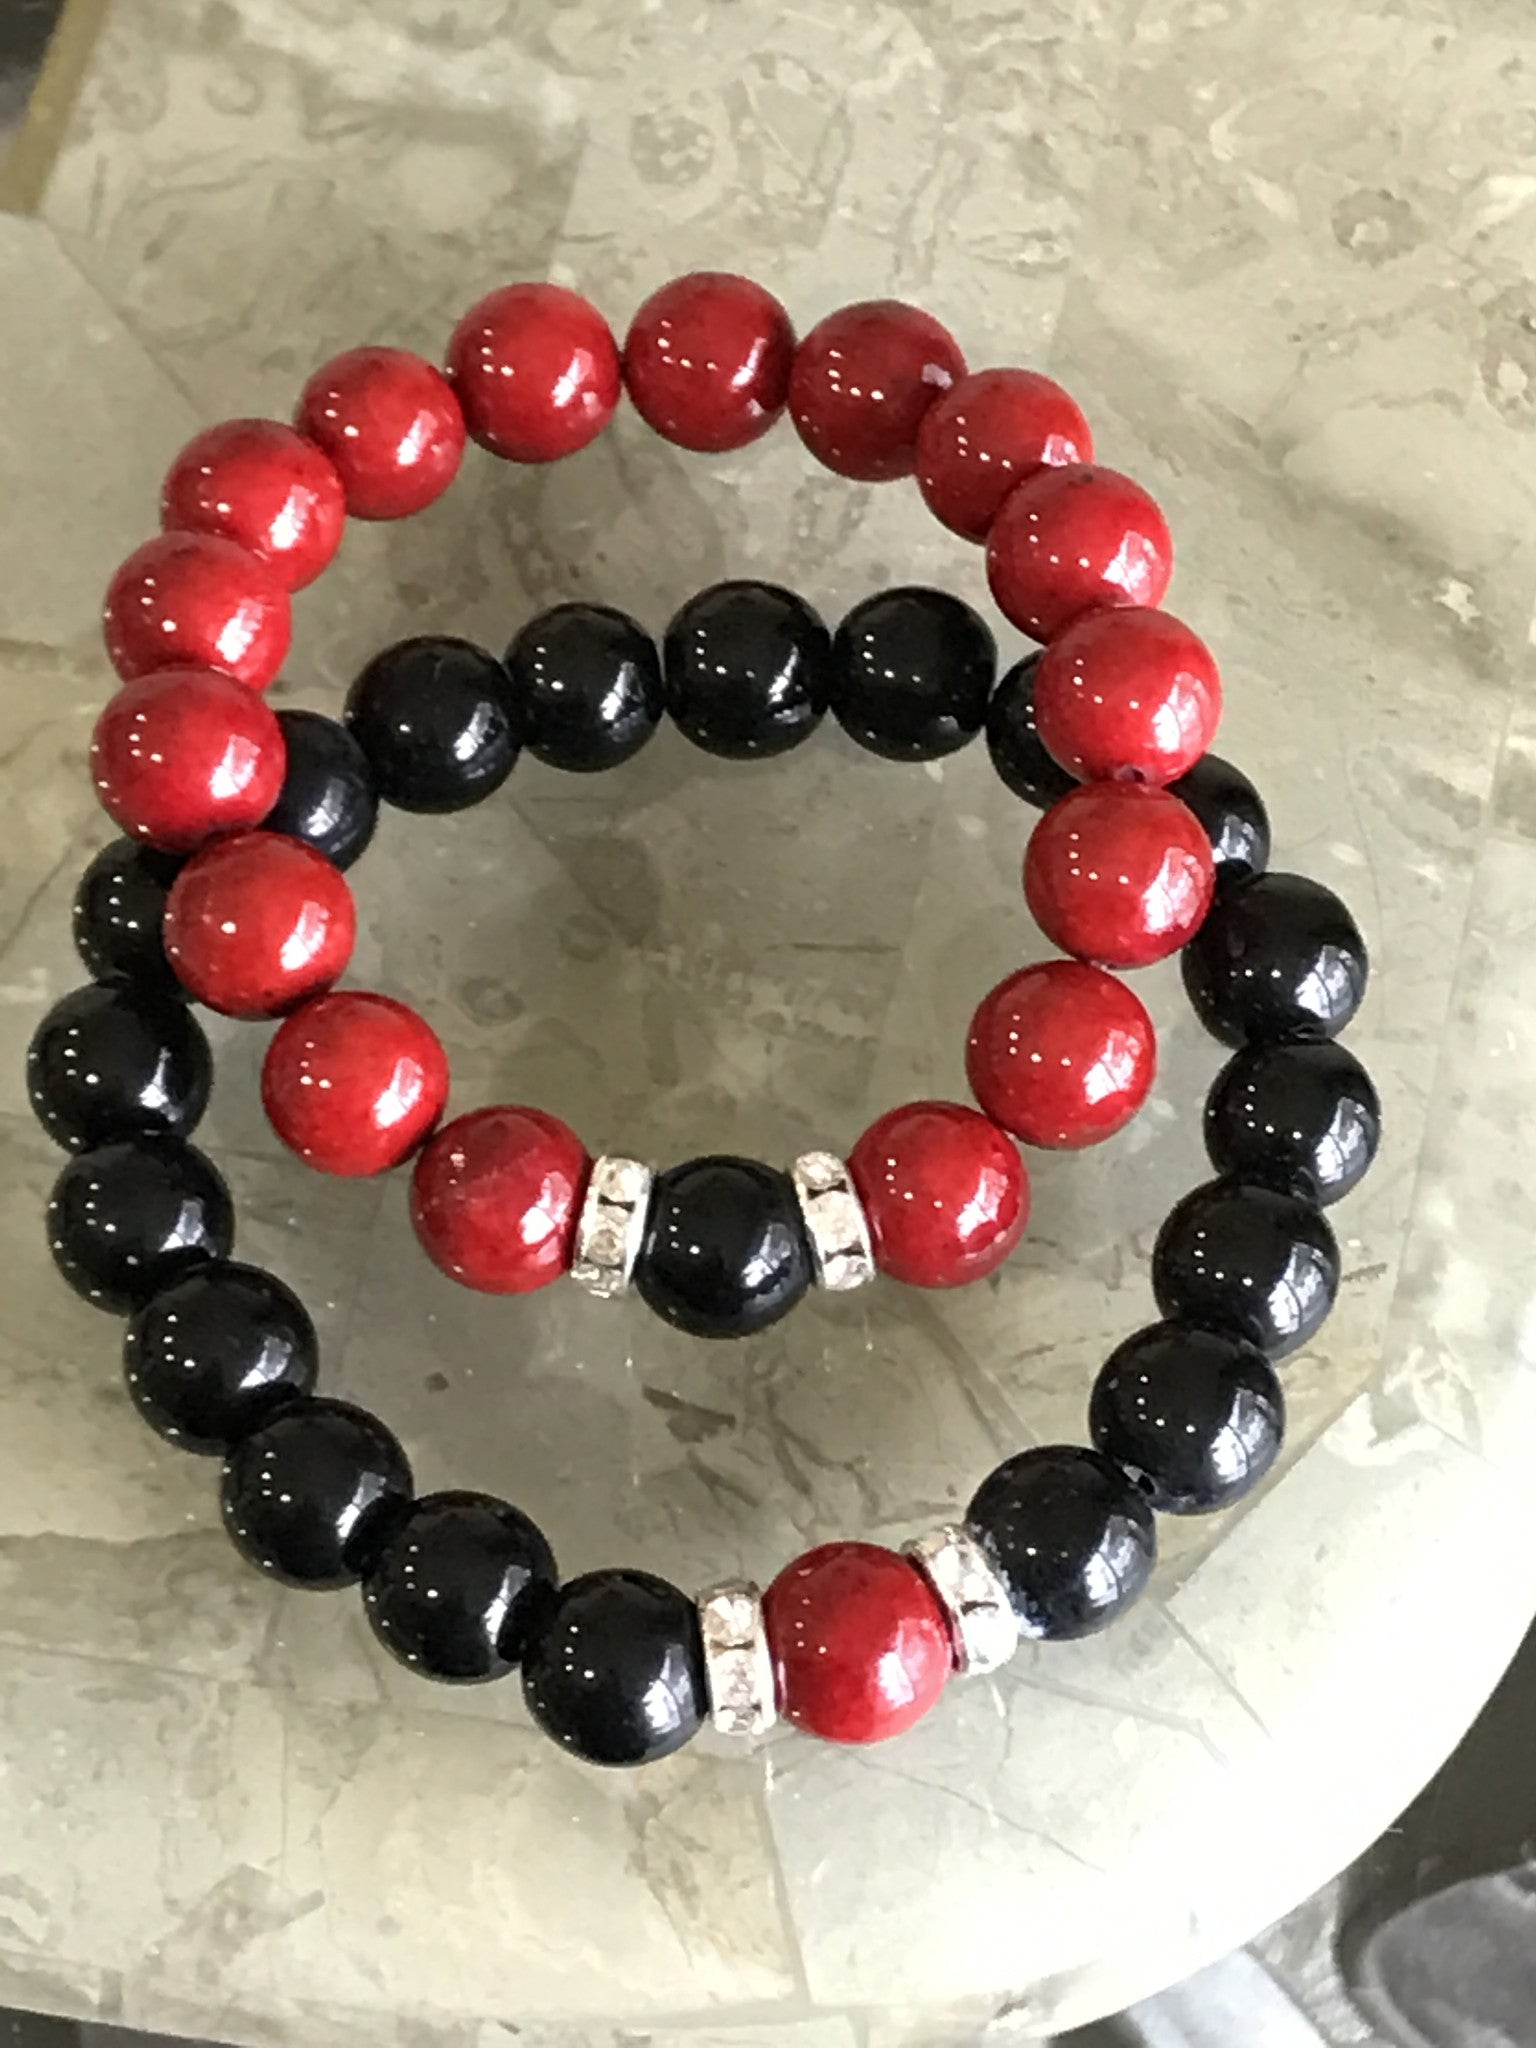 His & Hers Black & Red beads bracelets